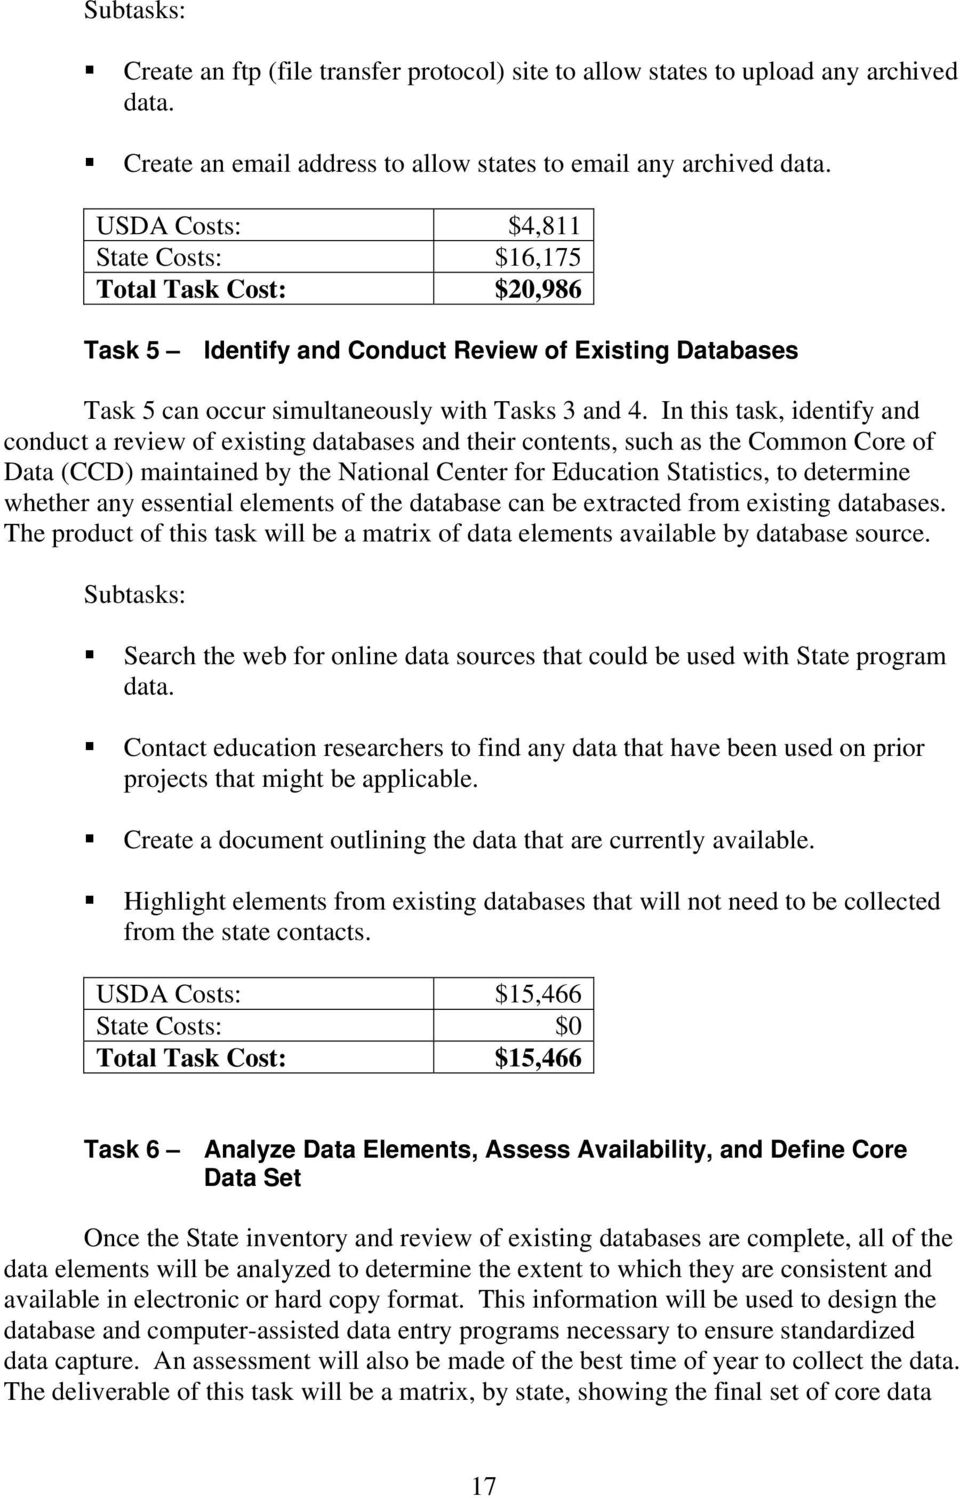 In this task, identify and conduct a review of existing databases and their contents, such as the Common Core of Data (CCD) maintained by the National Center for Education Statistics, to determine